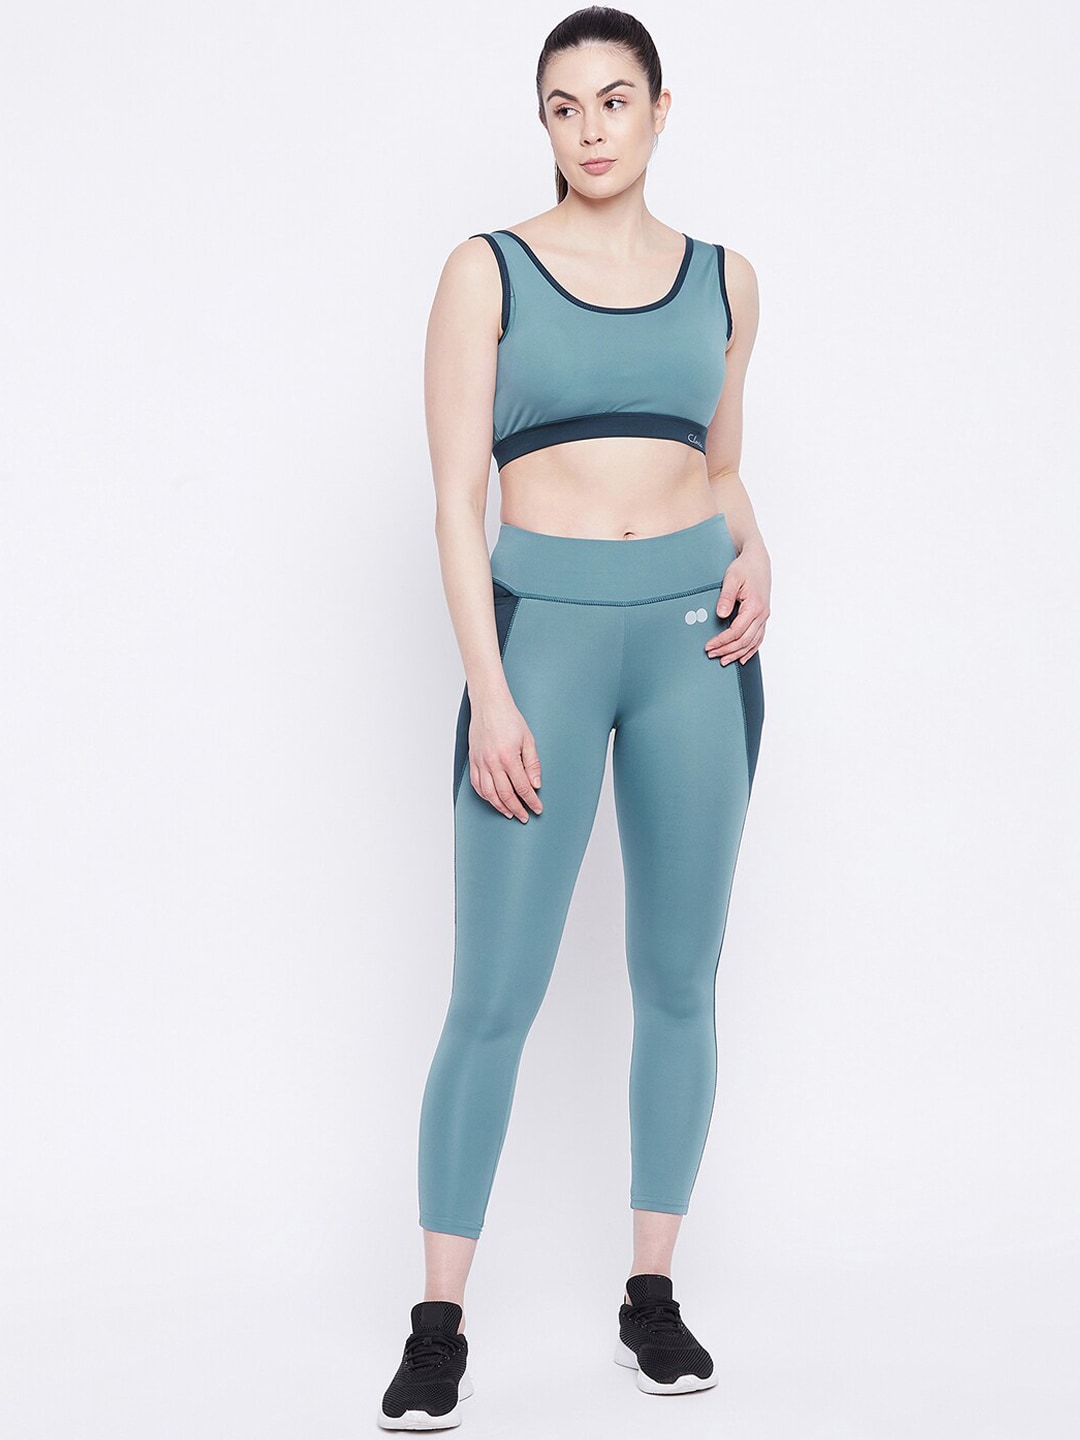 Clovia Women Teal & Black Padded Non Wired Sports Bra with Tights Price in India